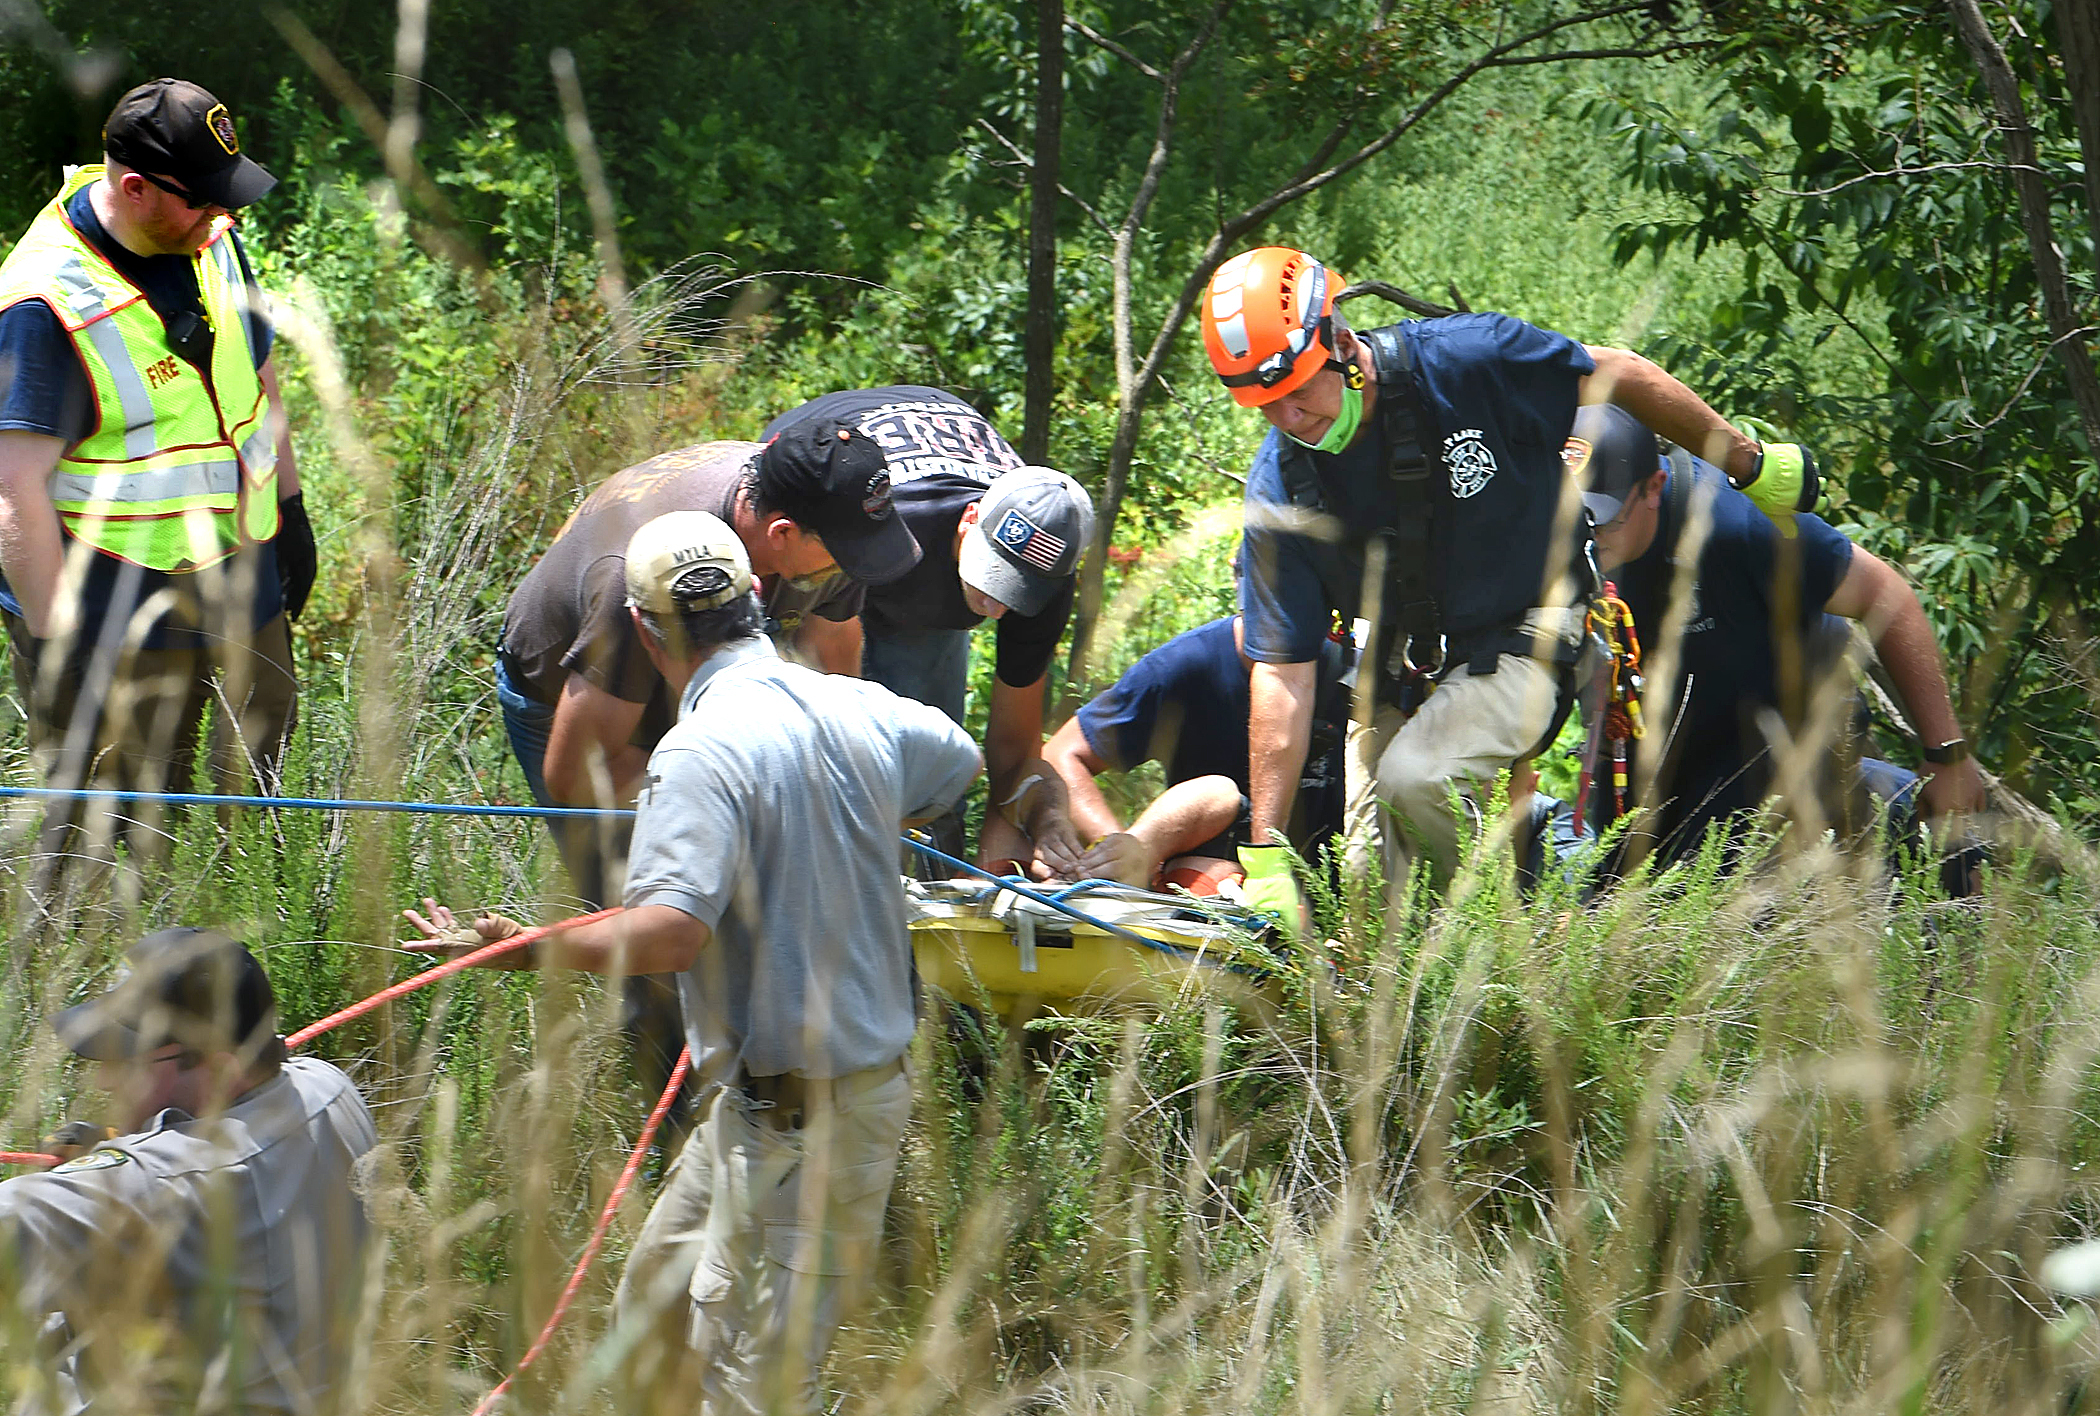 rescuers bring an injured man up the hill